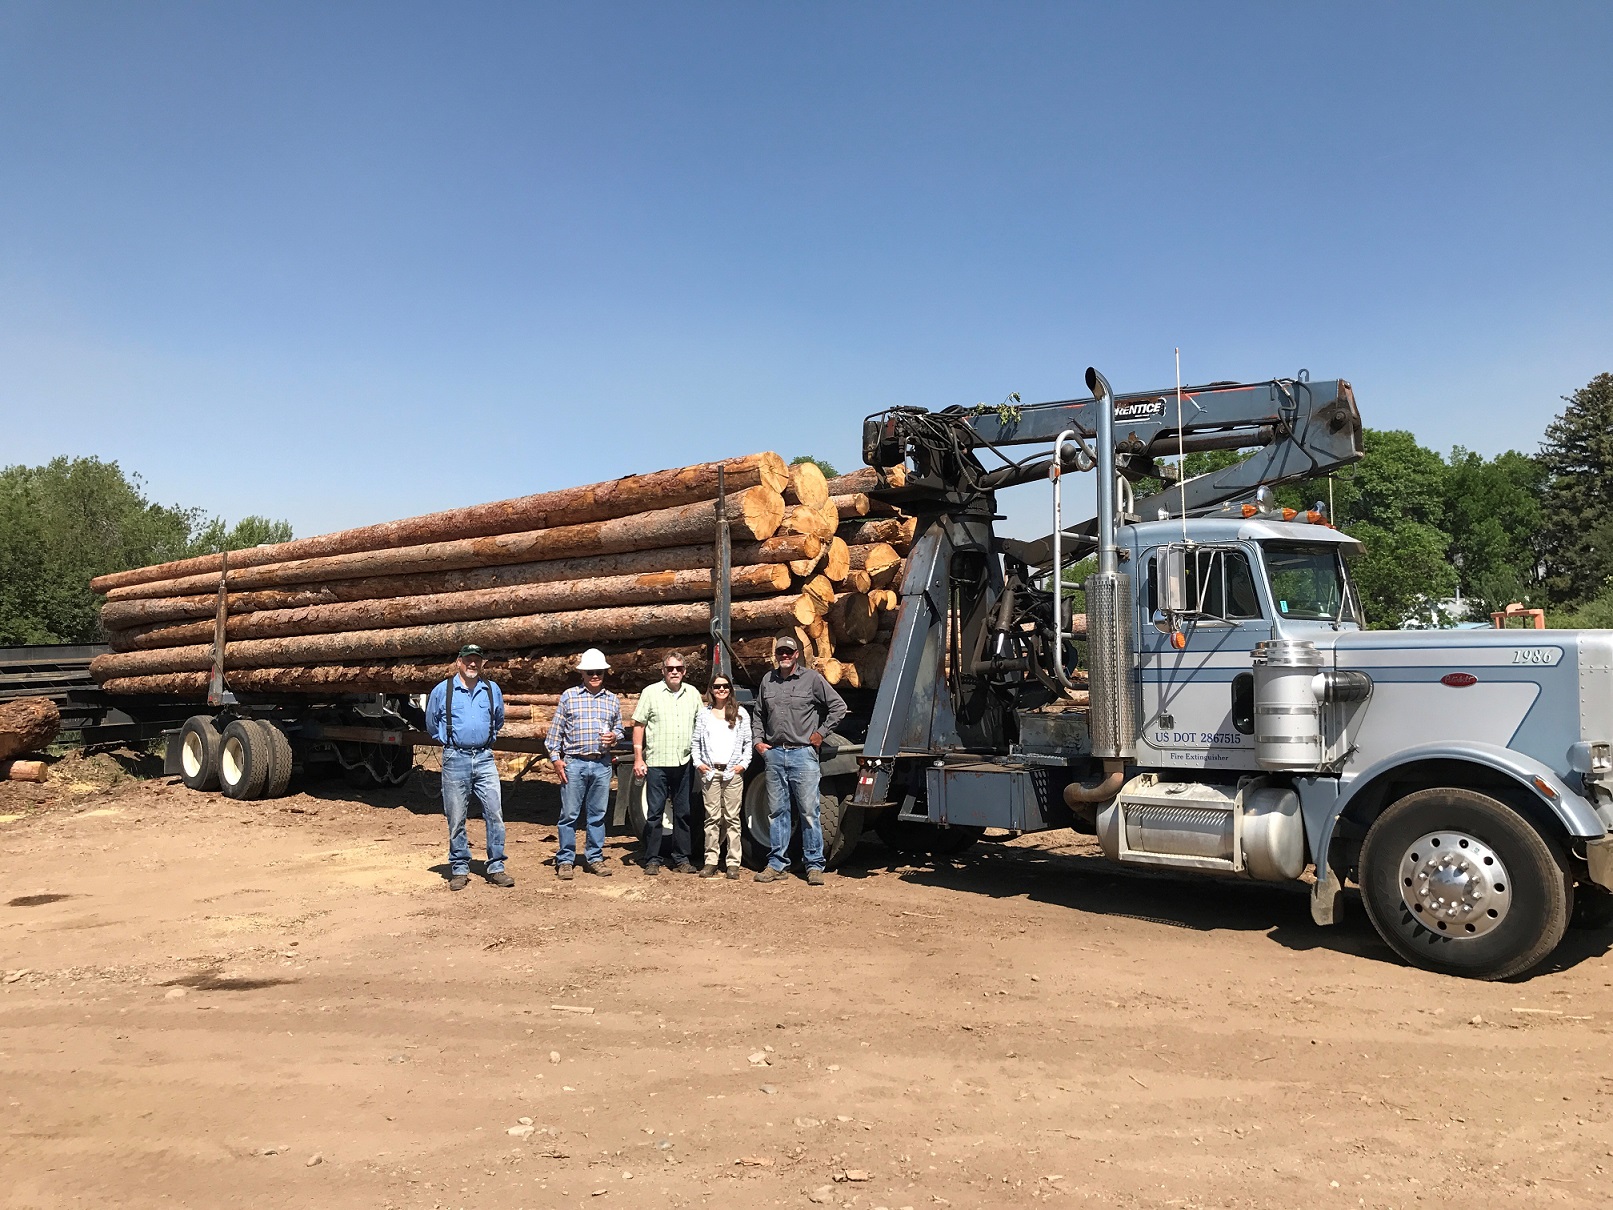 Group of people posing in front of semi truck loaded with lumber